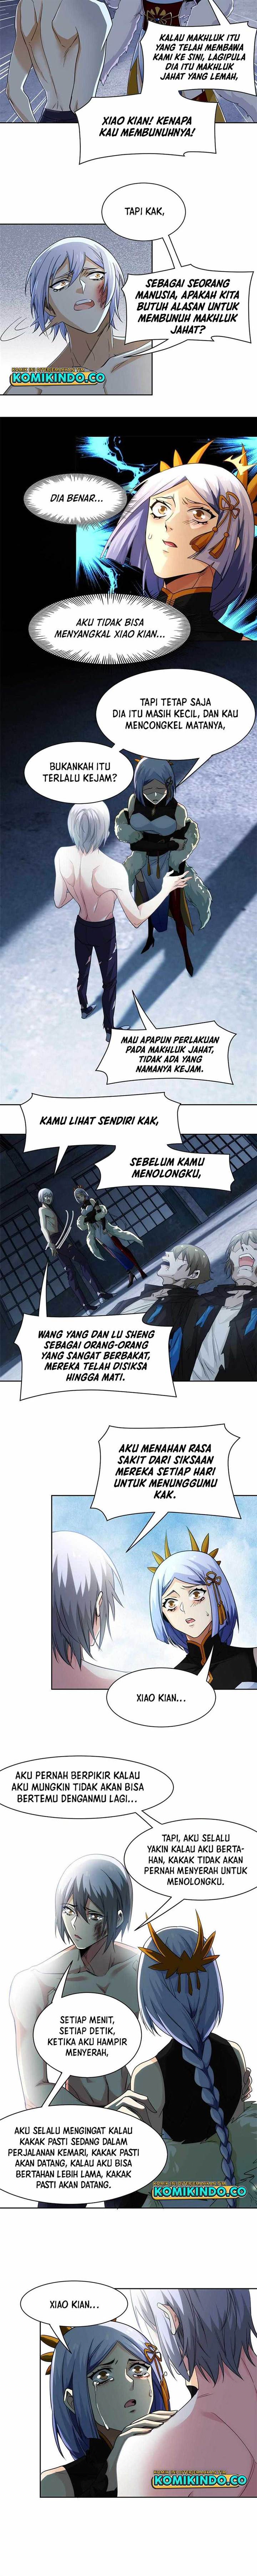 The Strong Man From the Mental Hospital Chapter 149